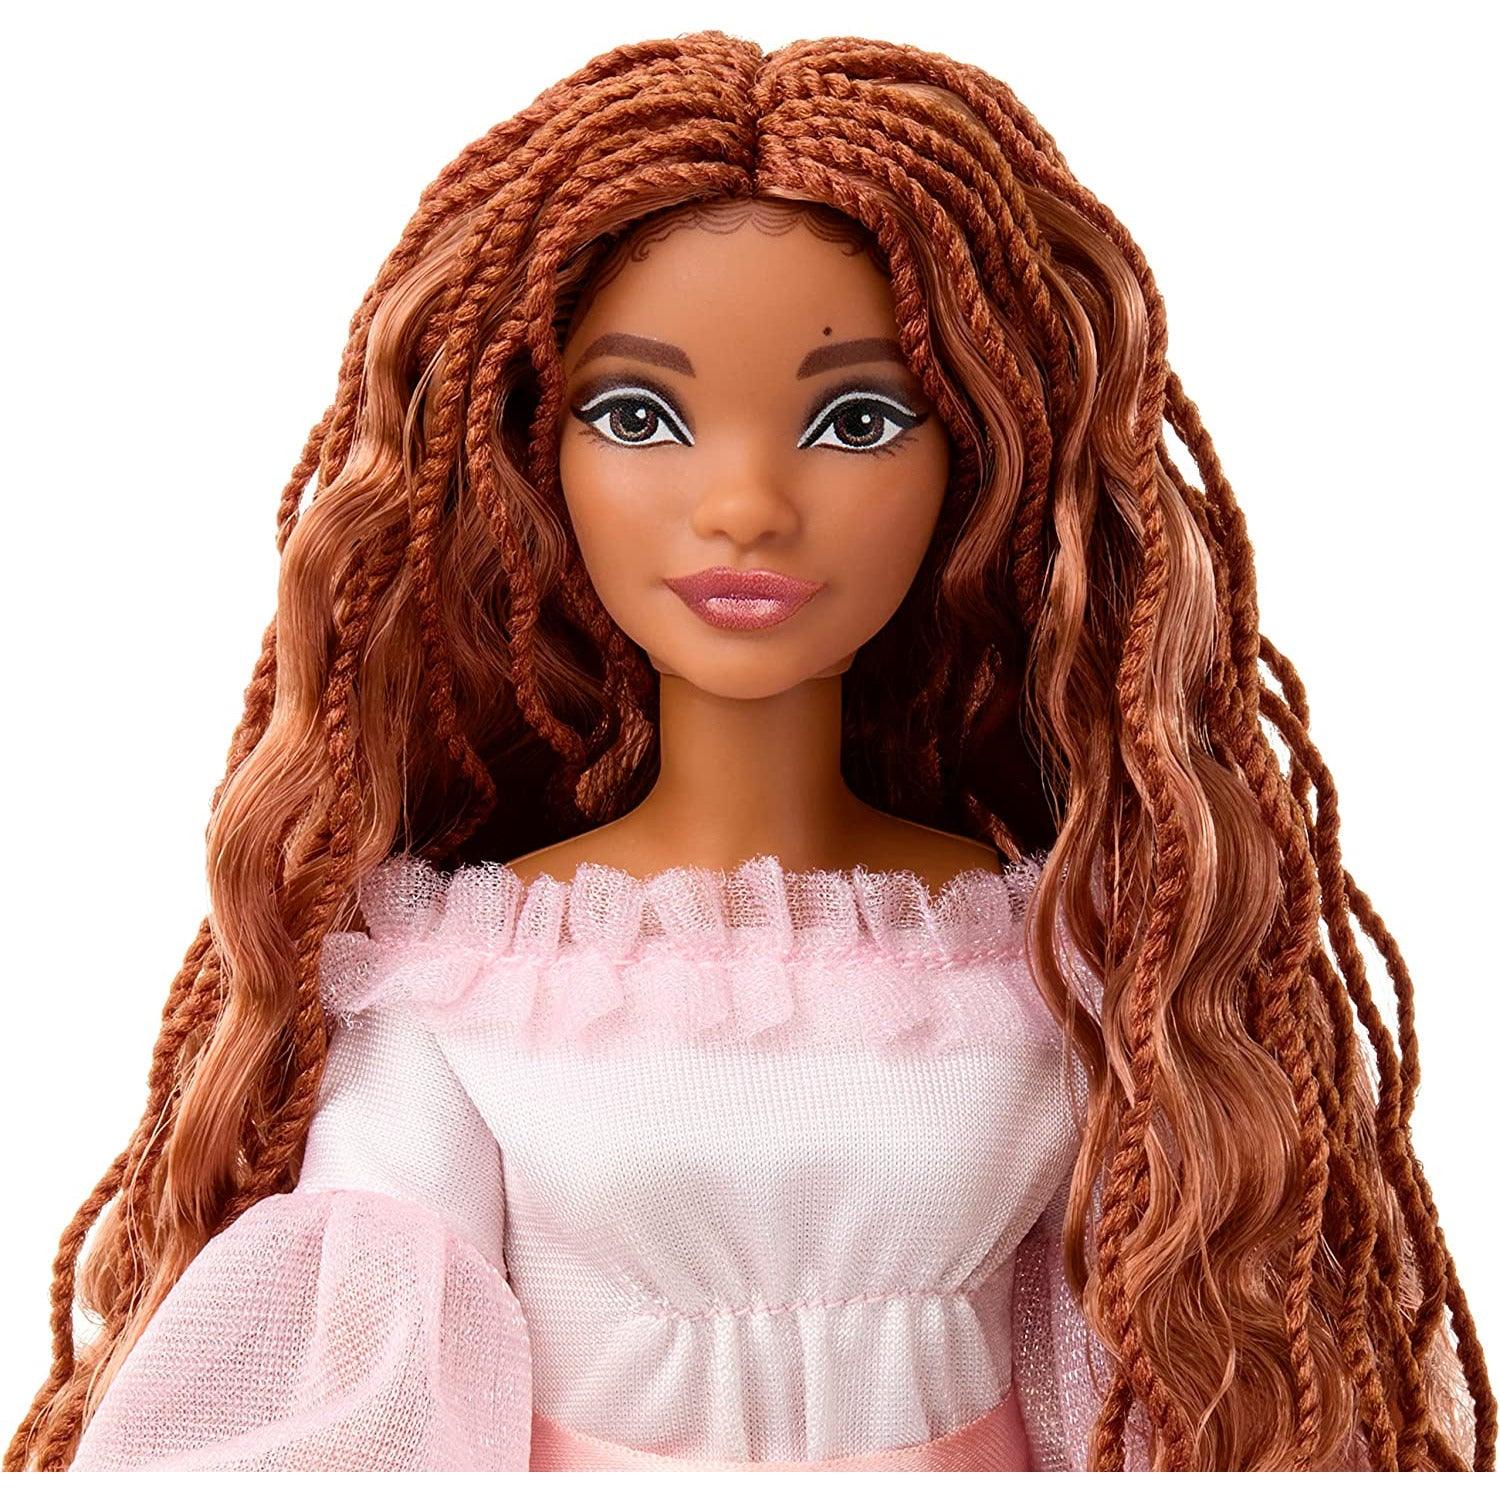 Mattel Disney The Little Mermaid, Celebration Ariel Doll with Red Hair and Pink Dress - BumbleToys - 5-7 Years, Boys, Disney Princess, dup-review-publication, Fashion Dolls & Accessories, Girls, Mattel, Pre-Order